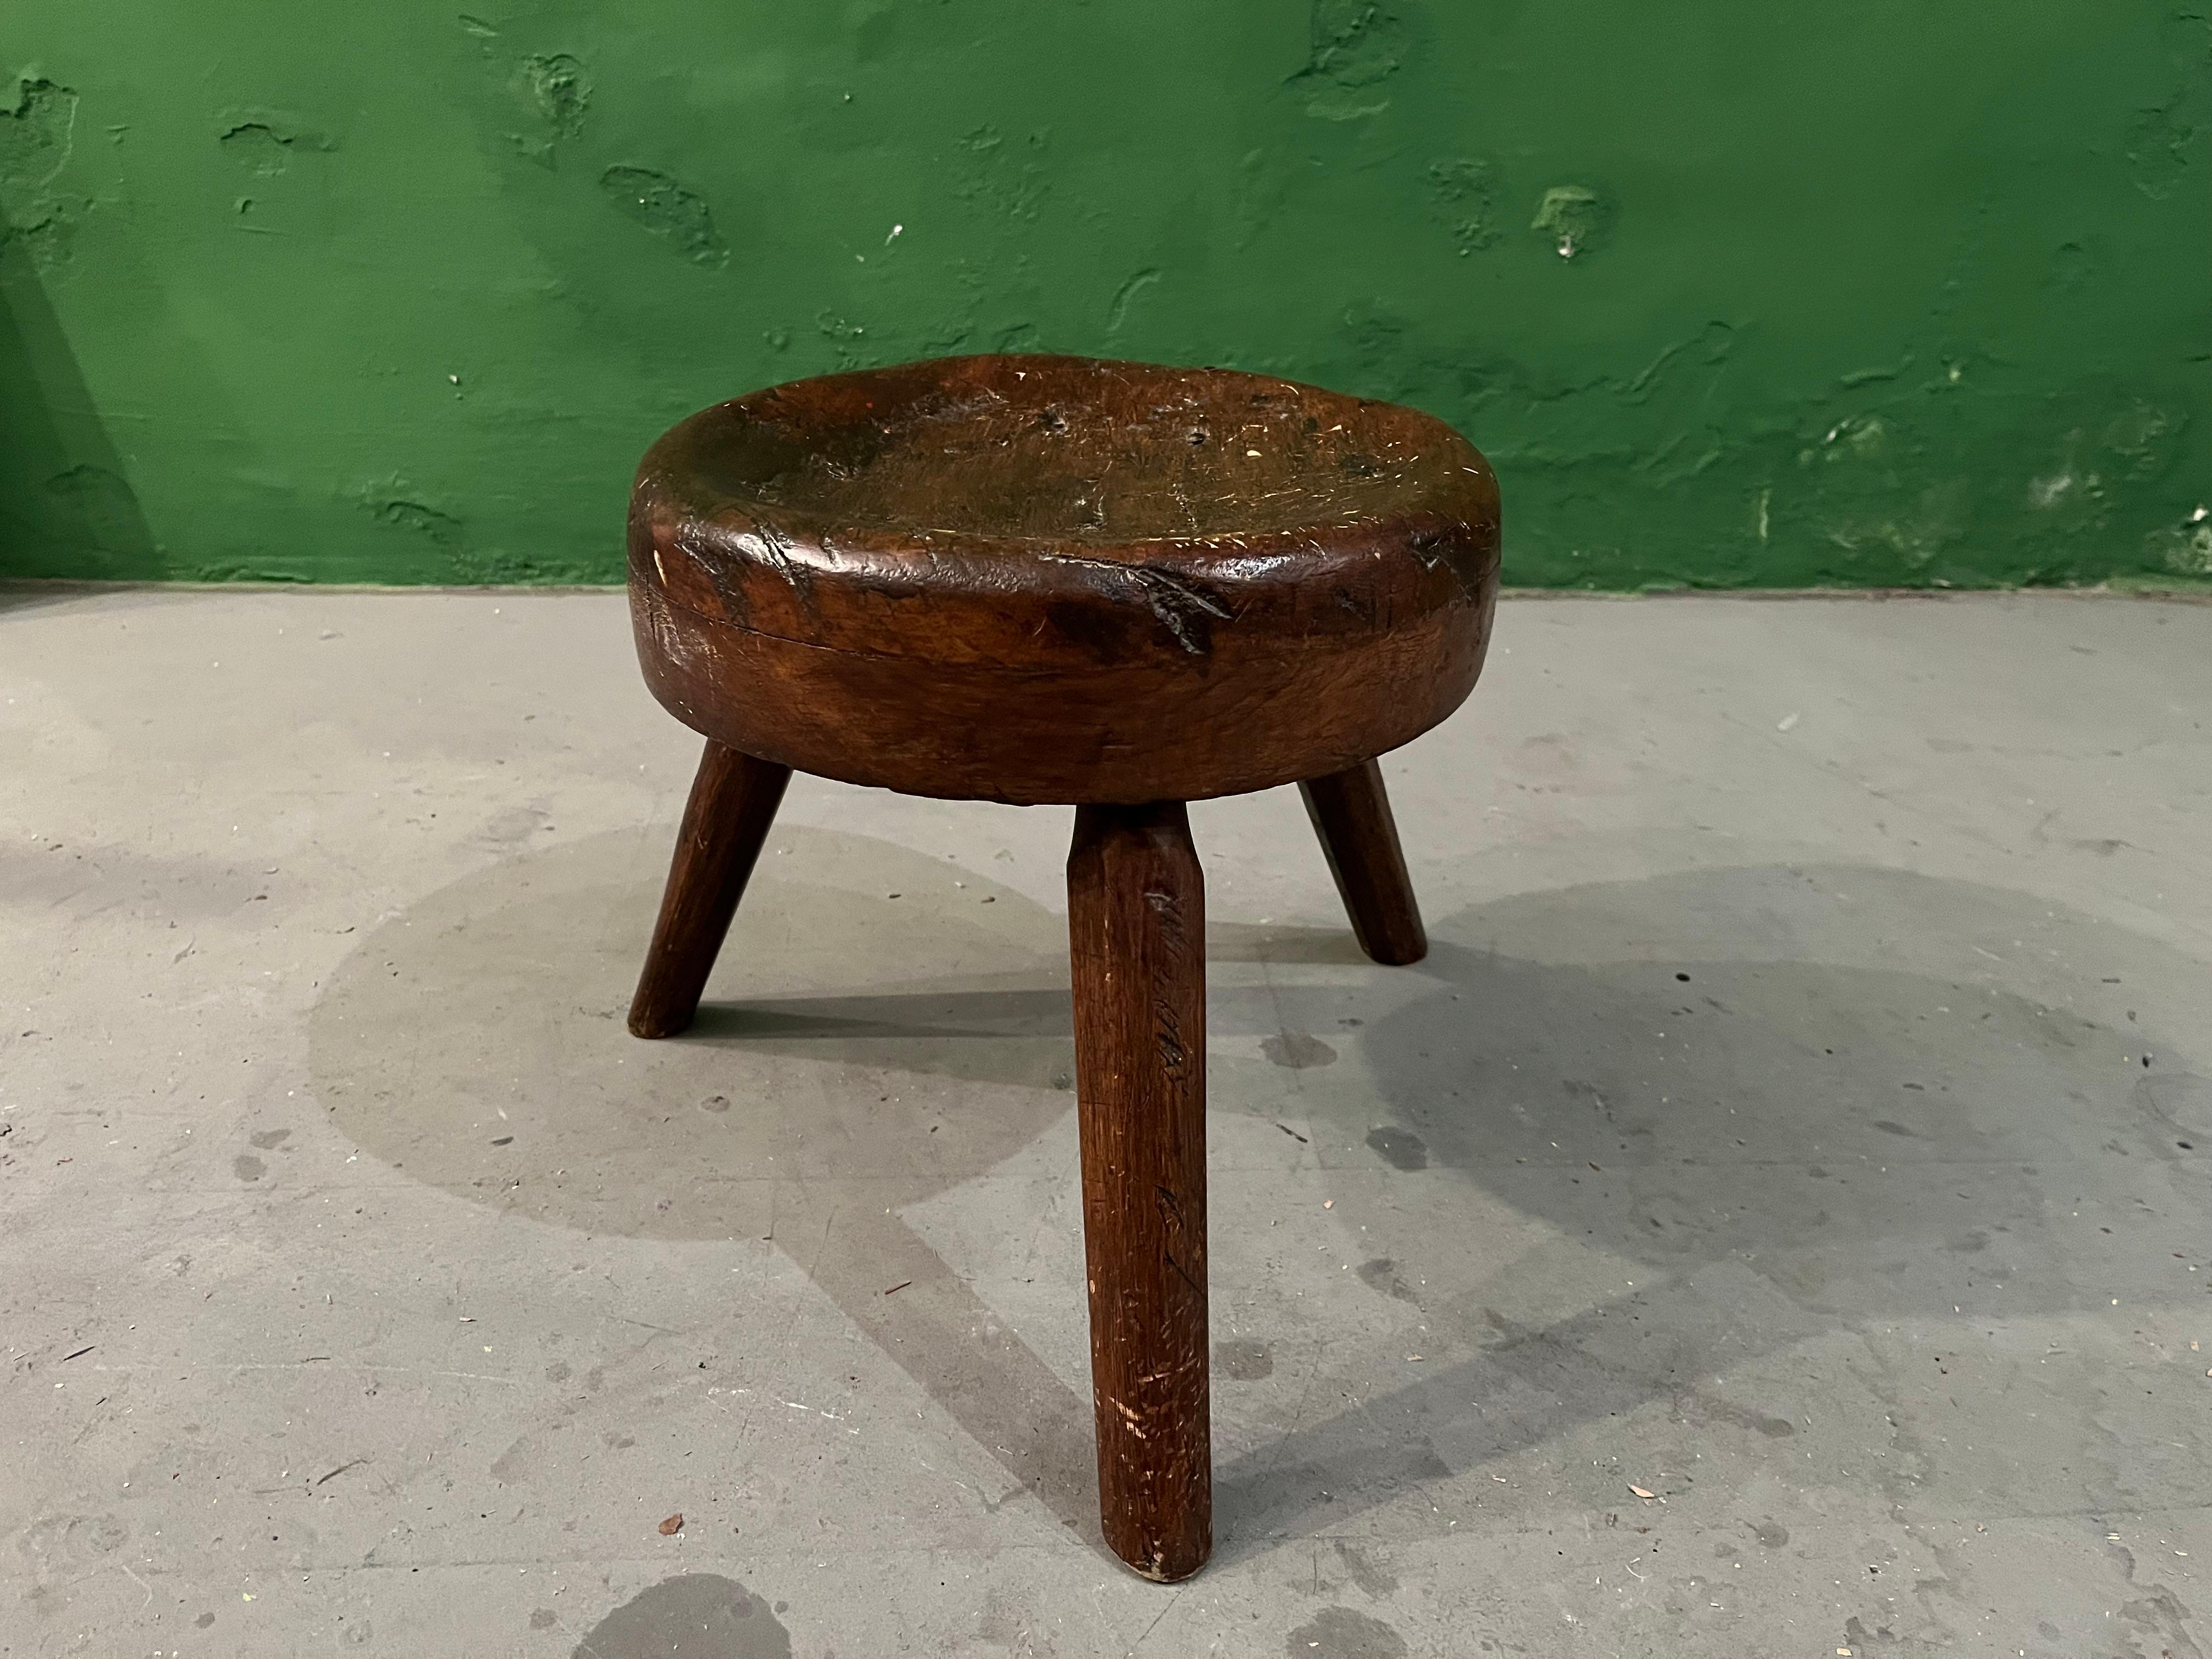 Ancient french stool with the most beautiful pattina, oak.
Charlotte Perriand was shurly insired by these kinds of classic craftsmenship and made the same stools in this style. This stool is full of history.